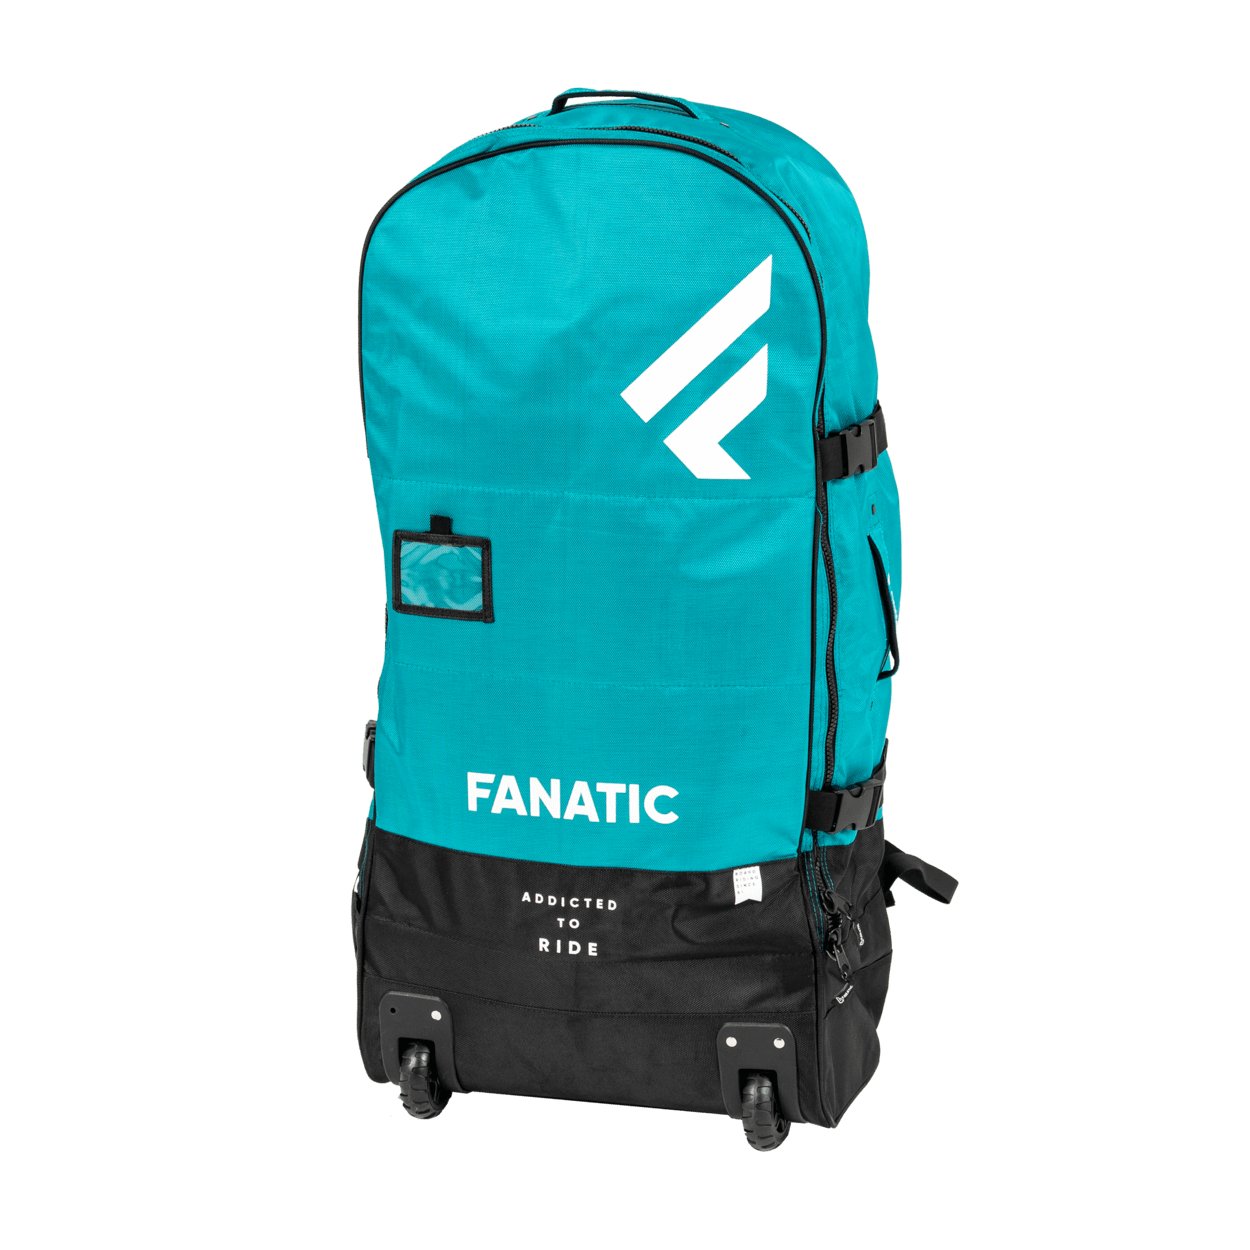 Fanatic Gearbag Fly Air Platform 2023 - Worthing Watersports - 9008415928088 - Spareparts - Fanatic SUP